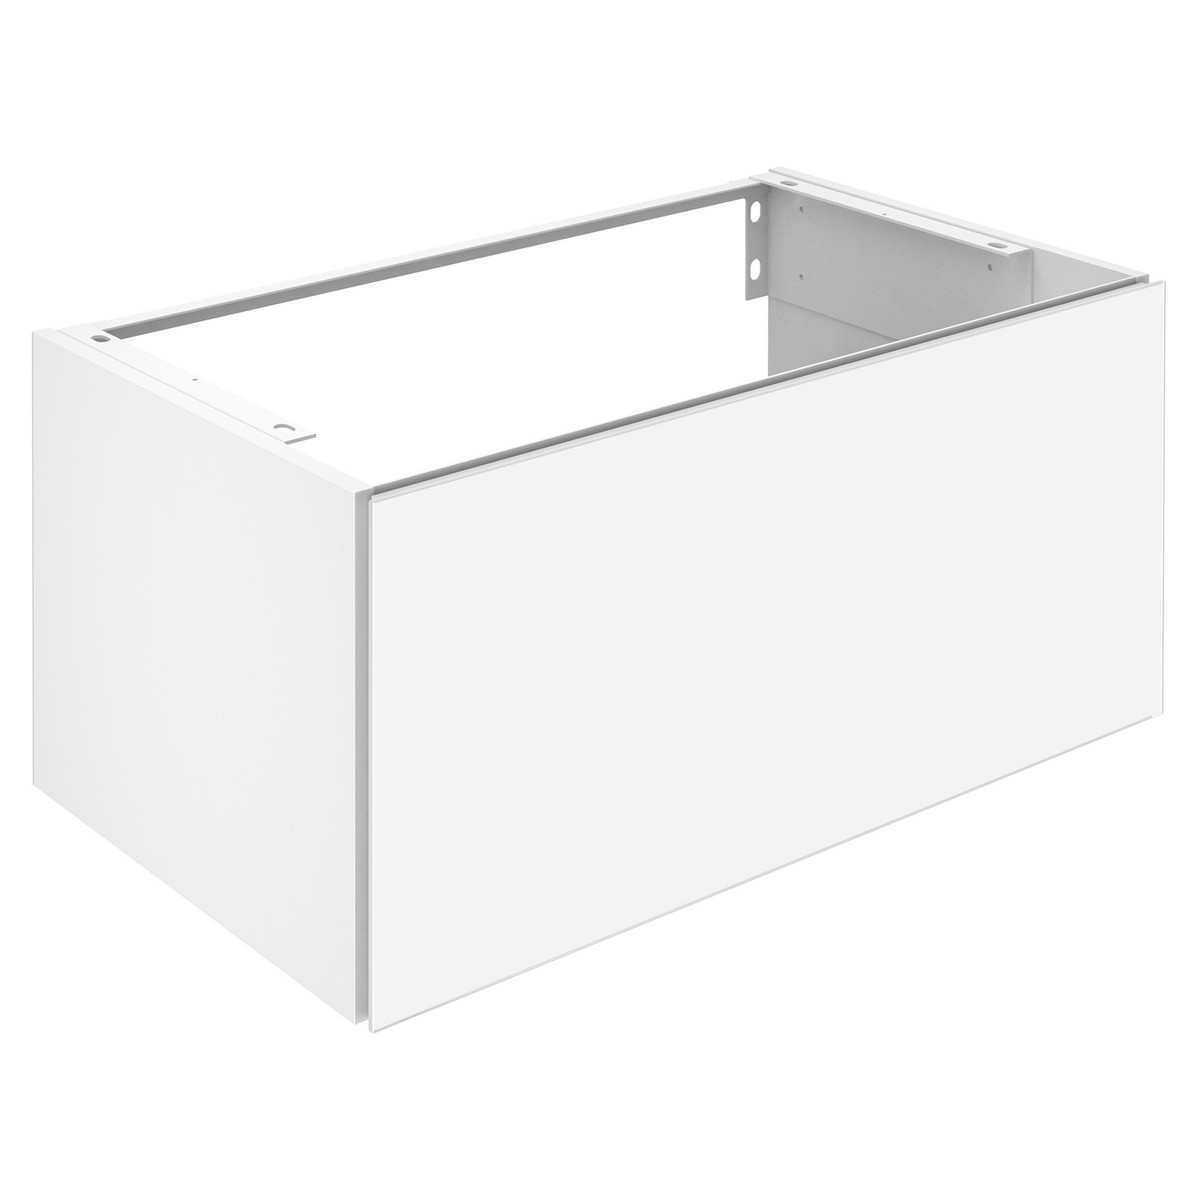 KEUCO 329610000 PLAN 31 1/2 INCH 1-DRAWER WALL MOUNTED SINGLE SINK BATHROOM VANITY CABINET ONLY